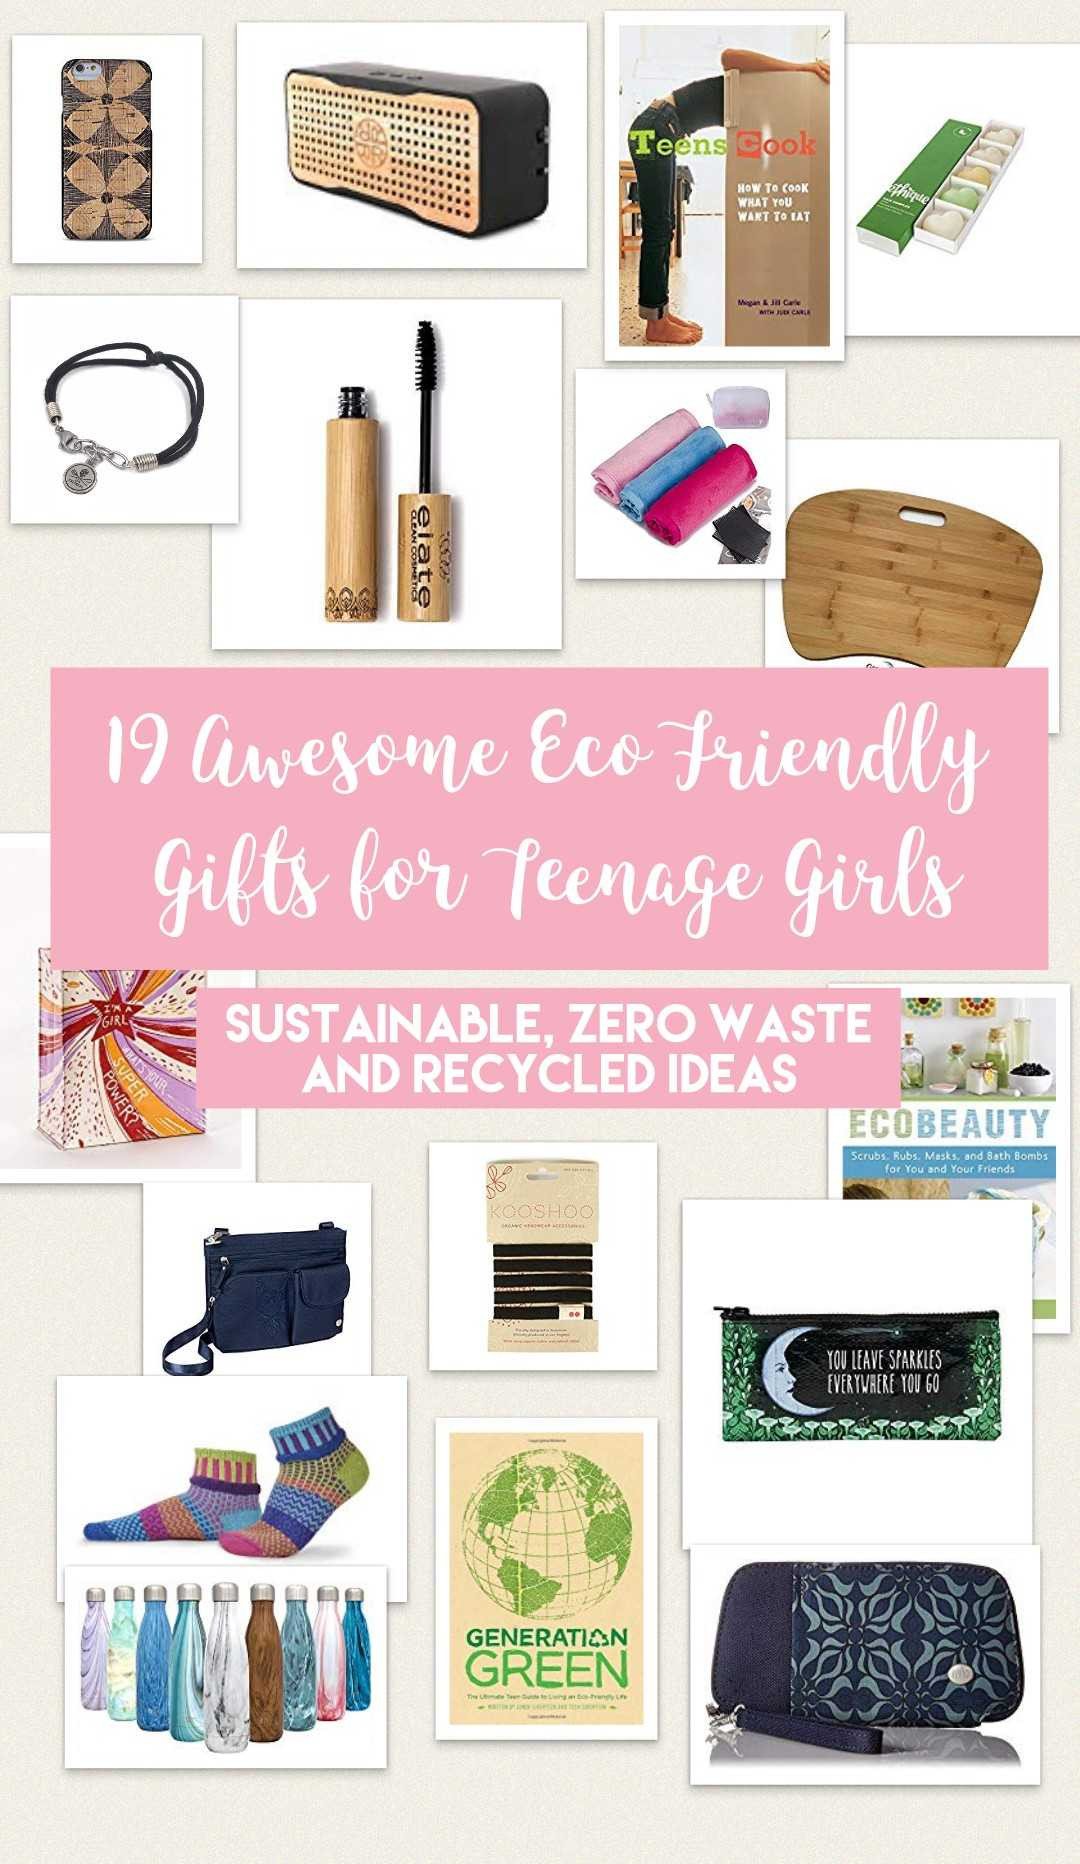 Gift Ideas For Teenage Girls
 19 Awesome Eco Friendly Gift Ideas for Teenage Girls